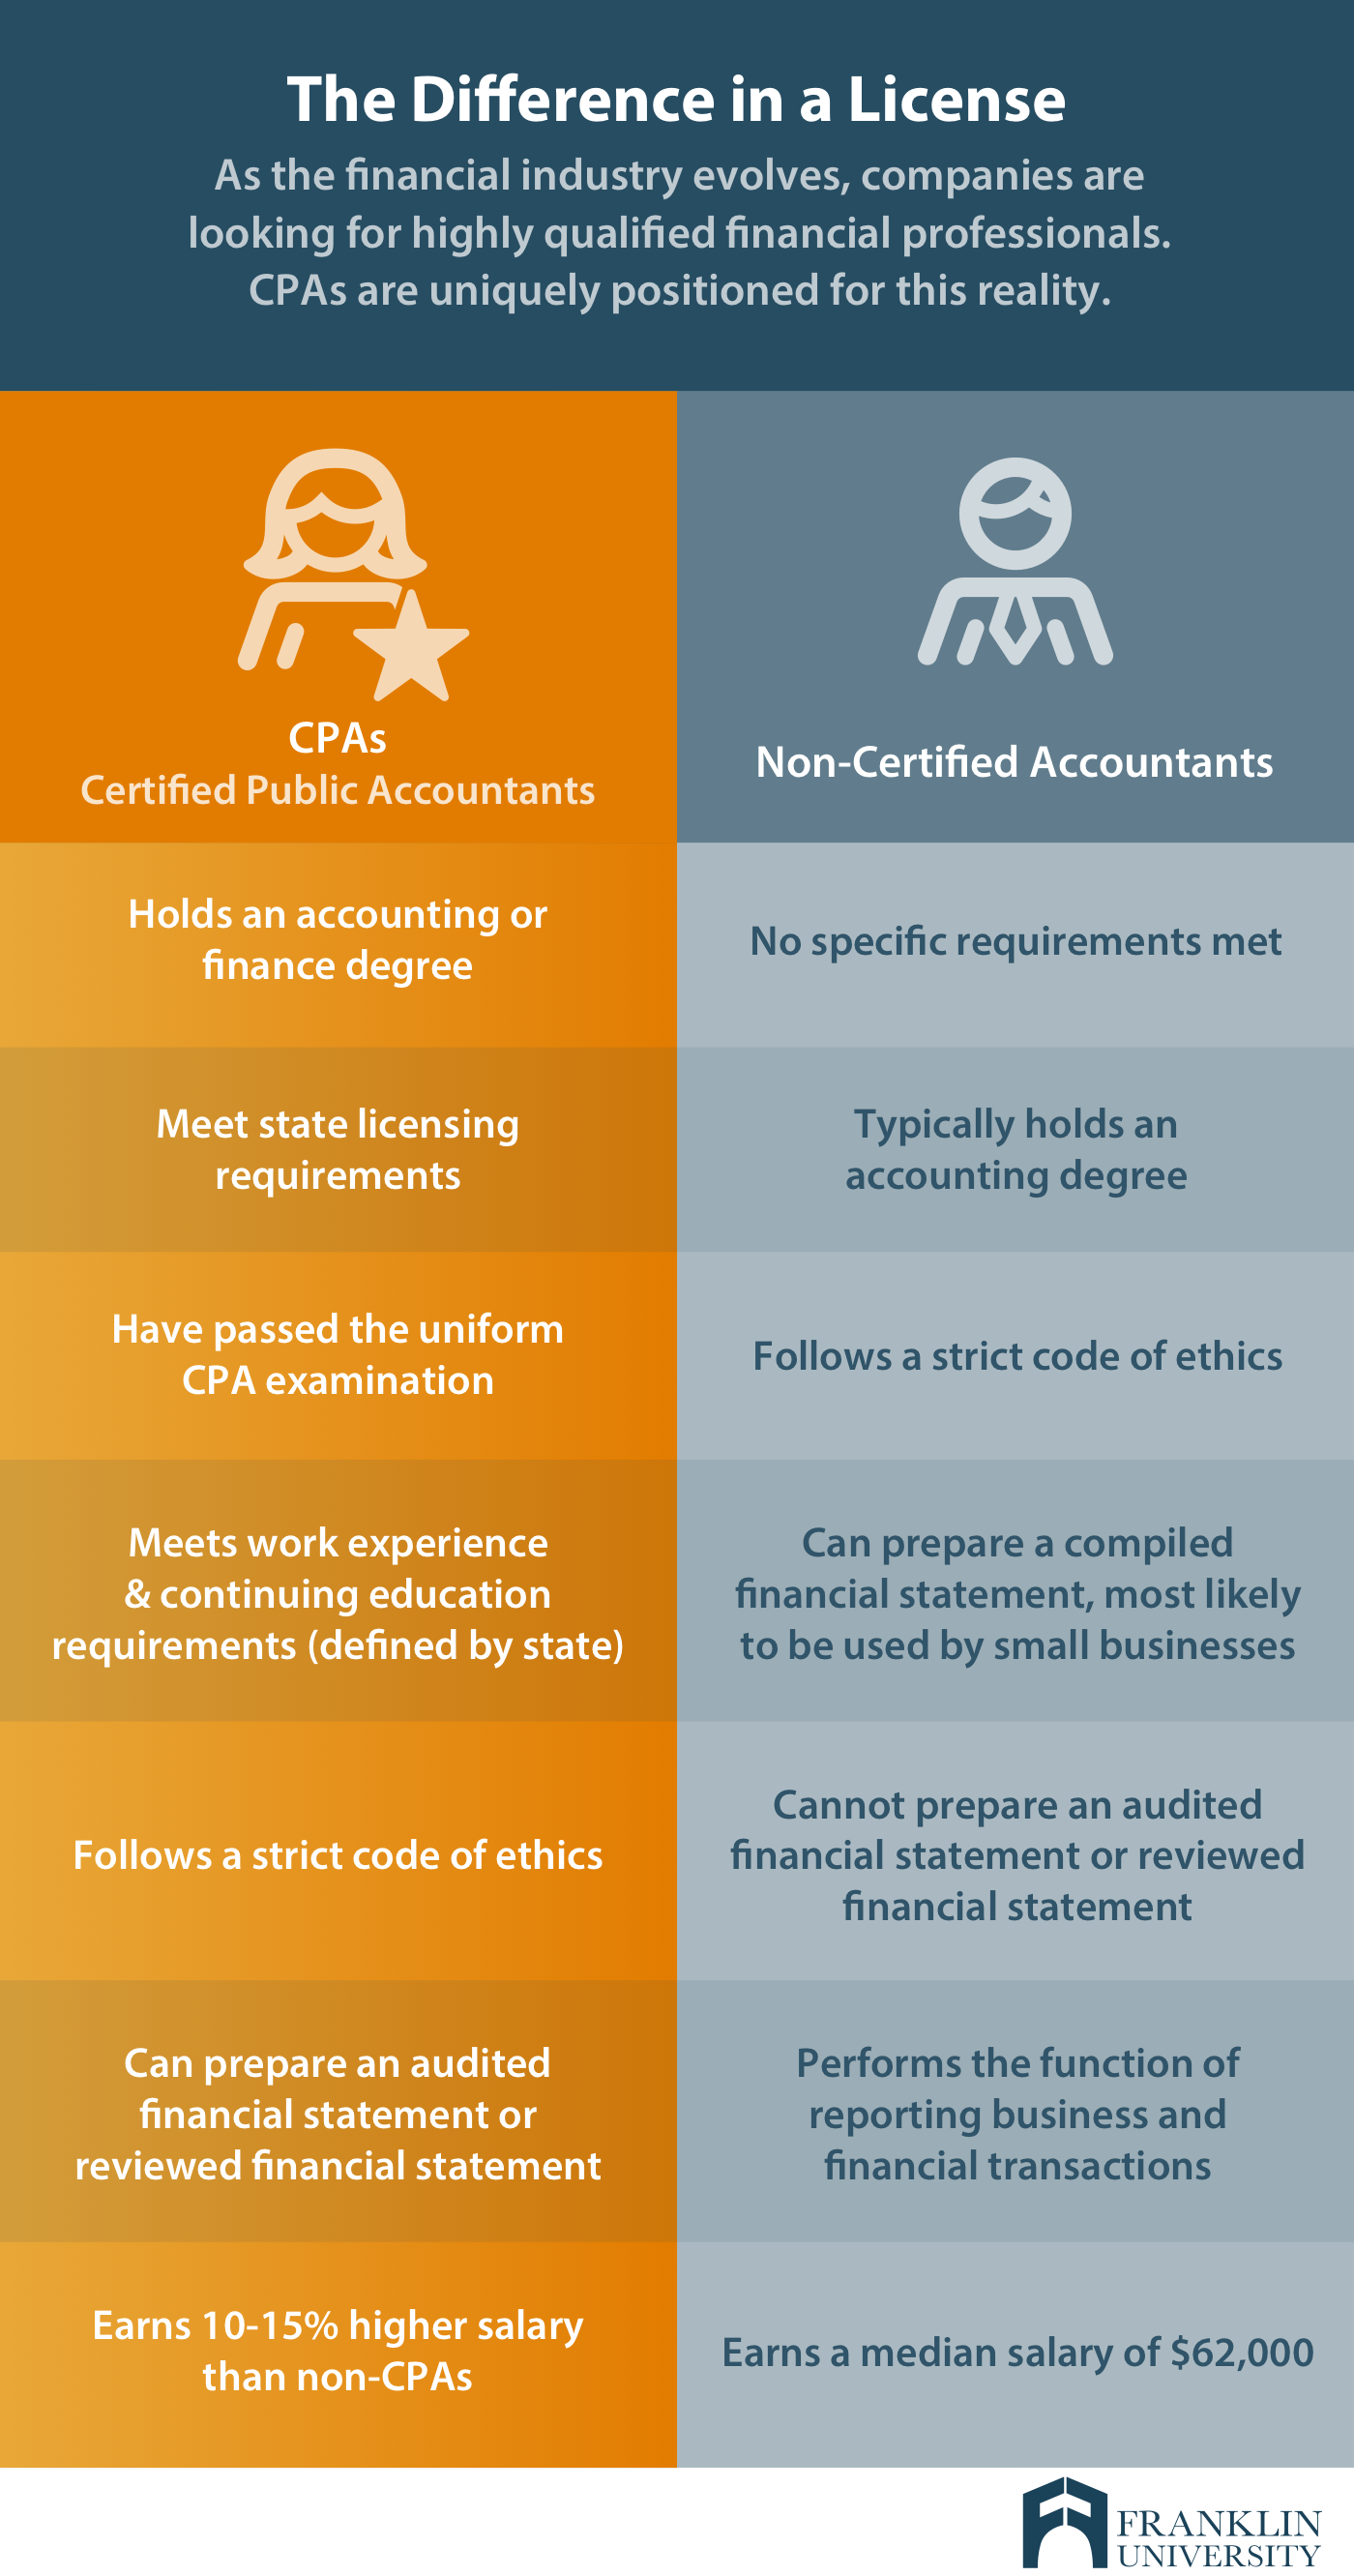 graphic describes the difference a license can make in the financial industry